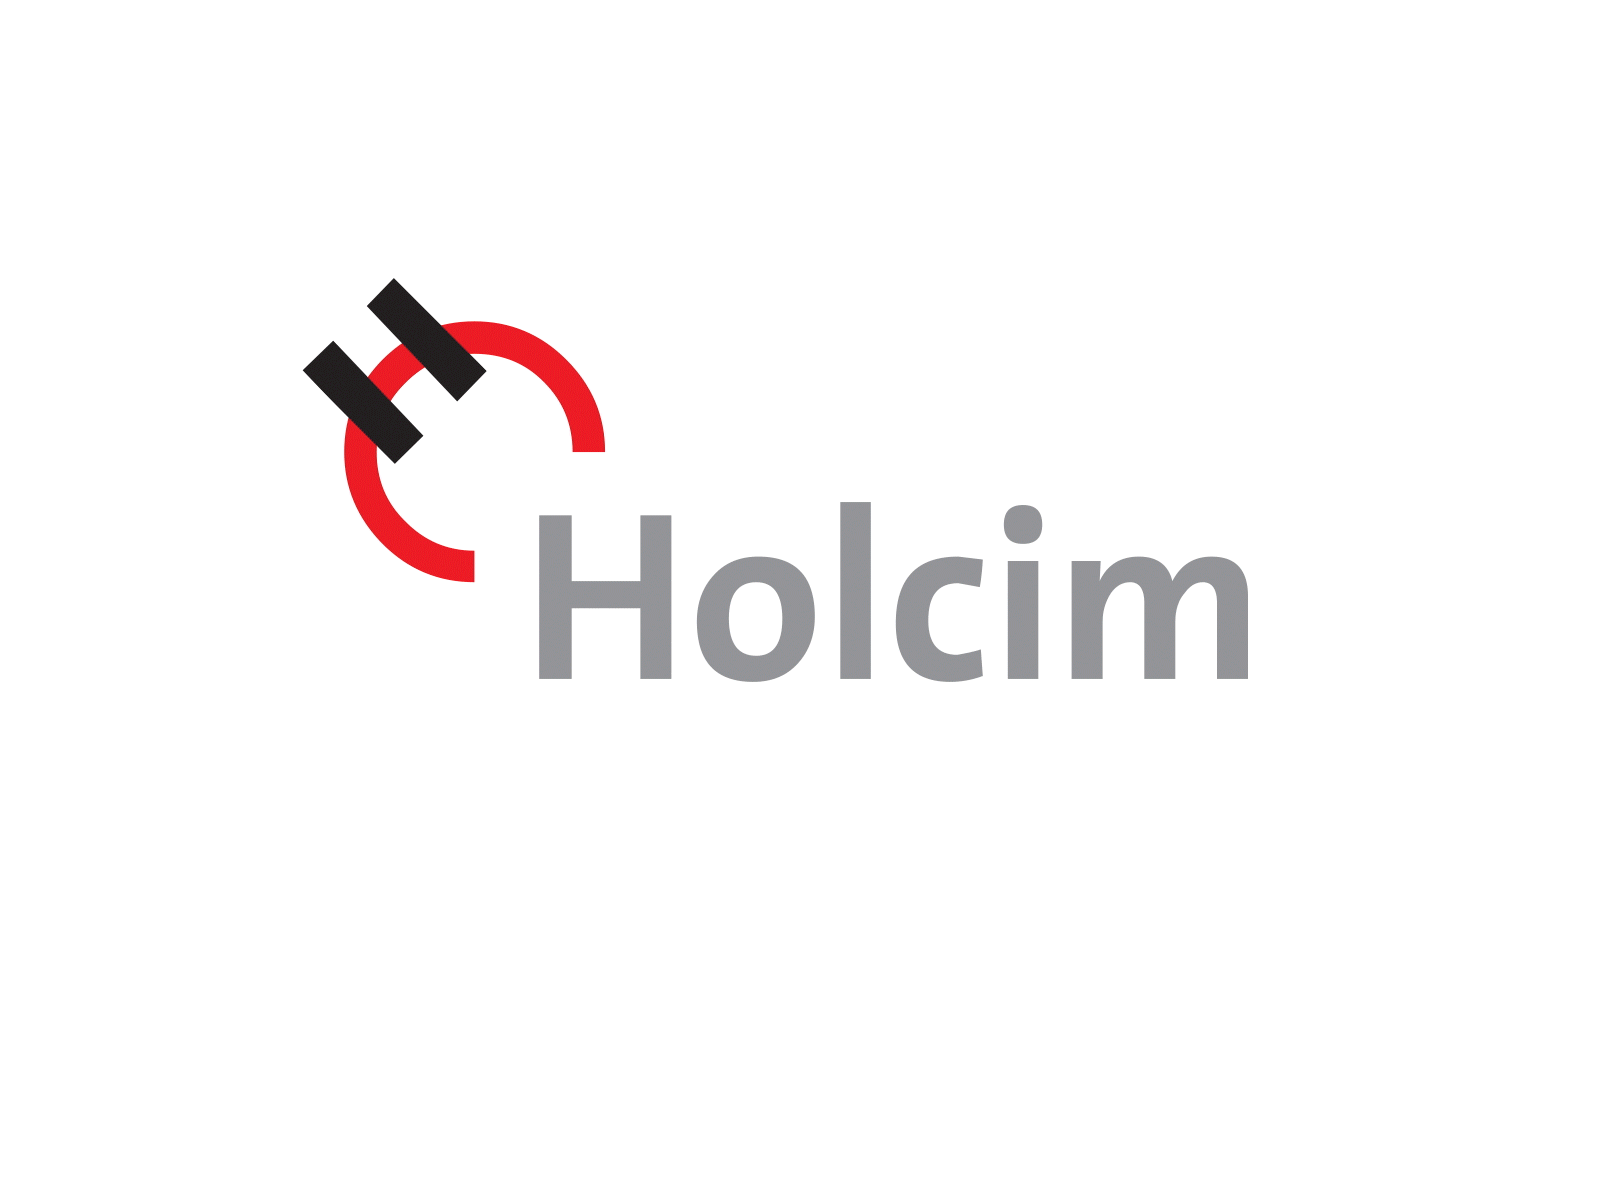 Holcim morphing to Dynamix